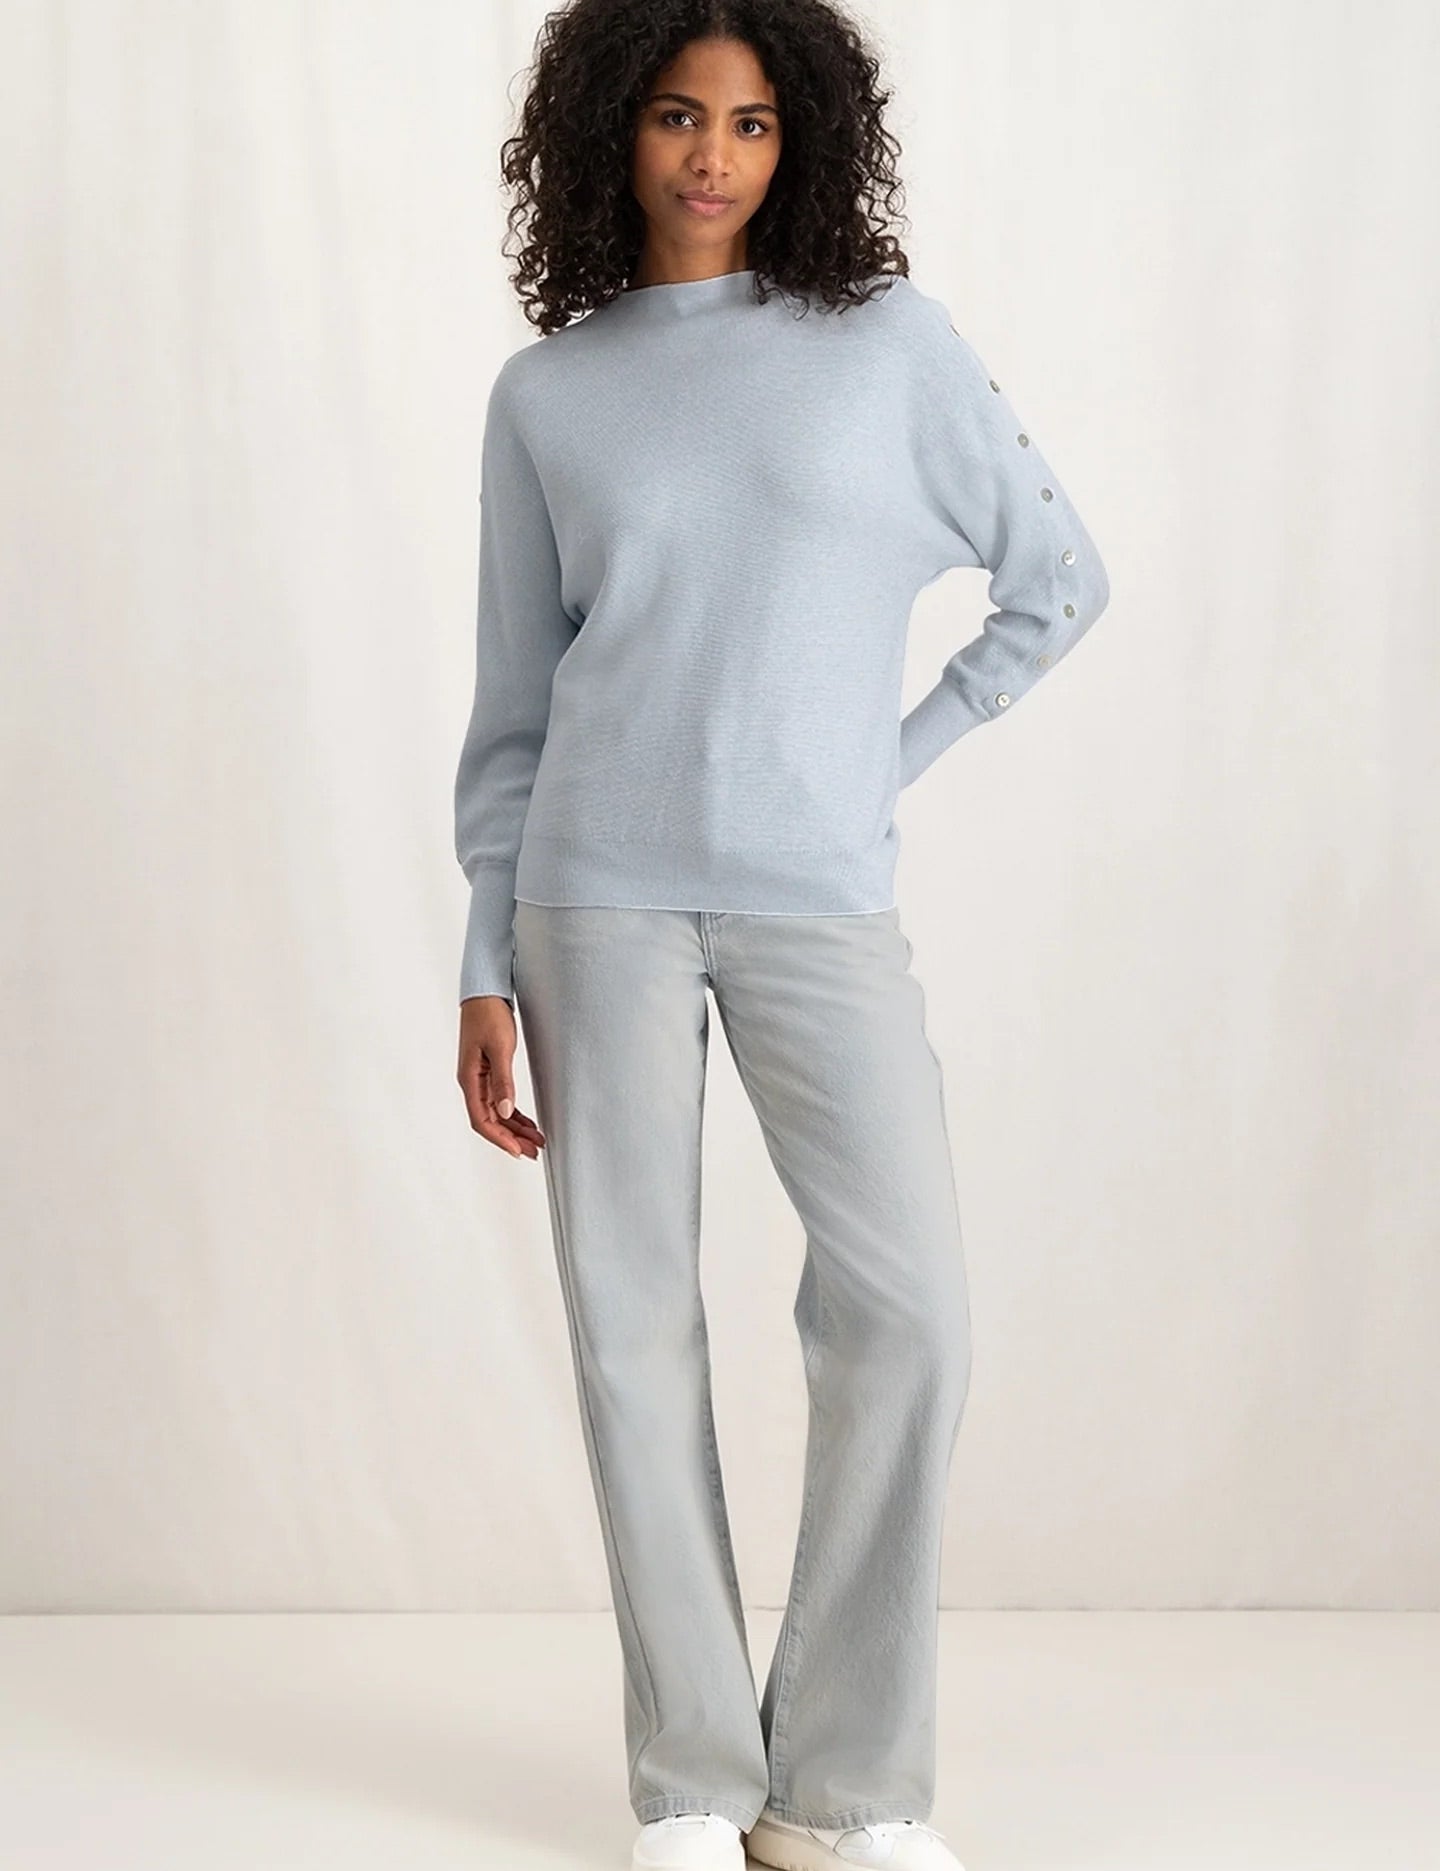 sweater-with-boatneck-long-sleeves-and-button-details-plein-air-blue-melange_522d4838-d656-4006-8928-c23ead07917d_2880x_jpg.jpg